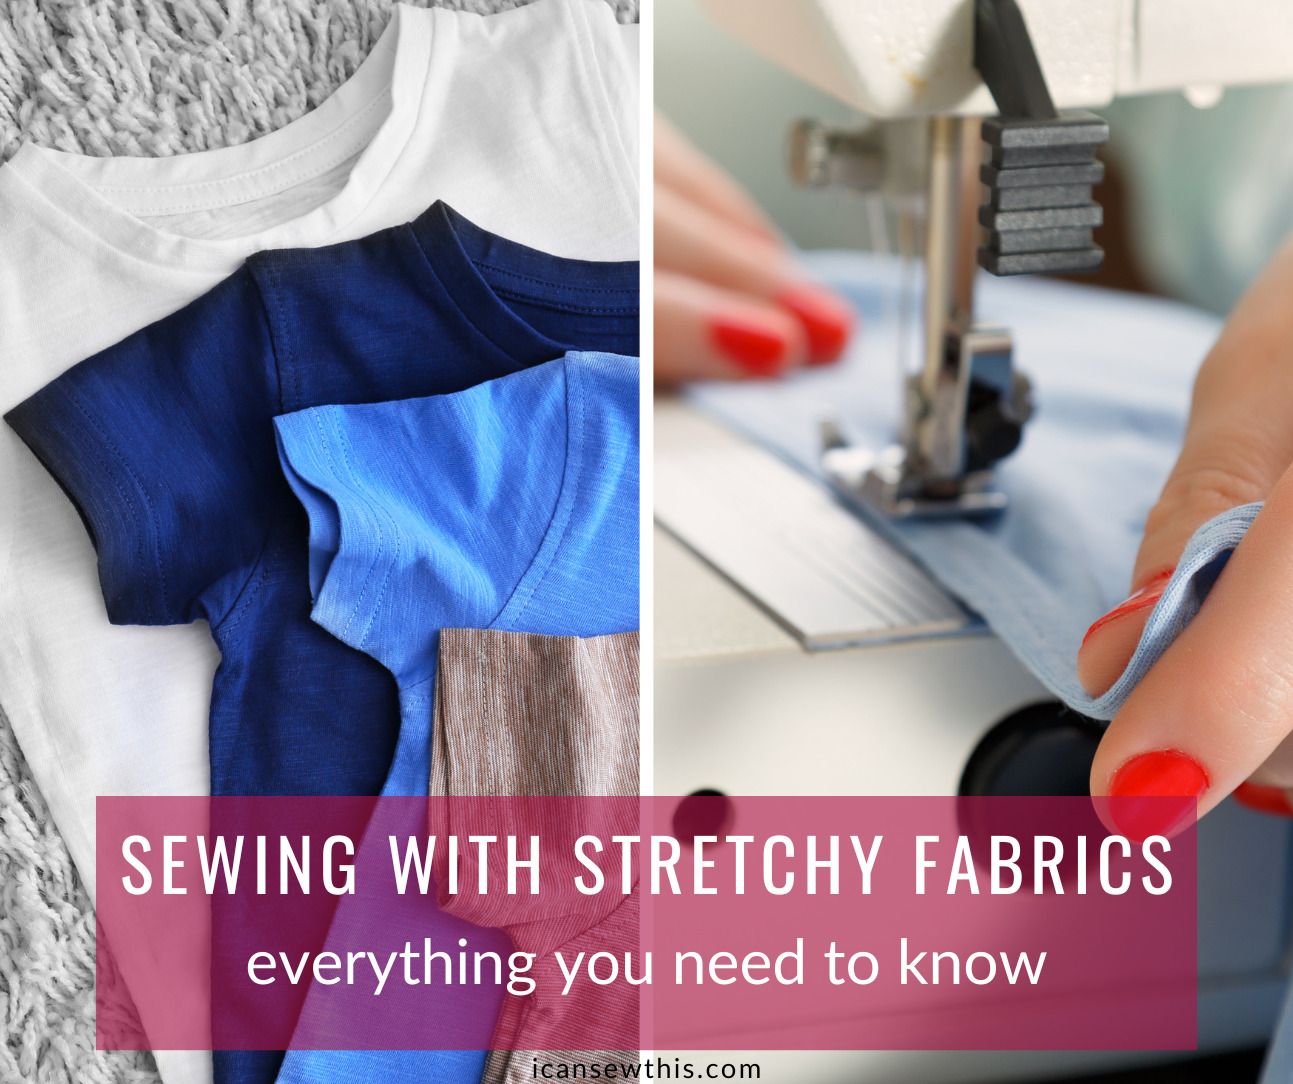 13+ Sewing Patterns Says Stretch Of Fabrics - RhianonElice